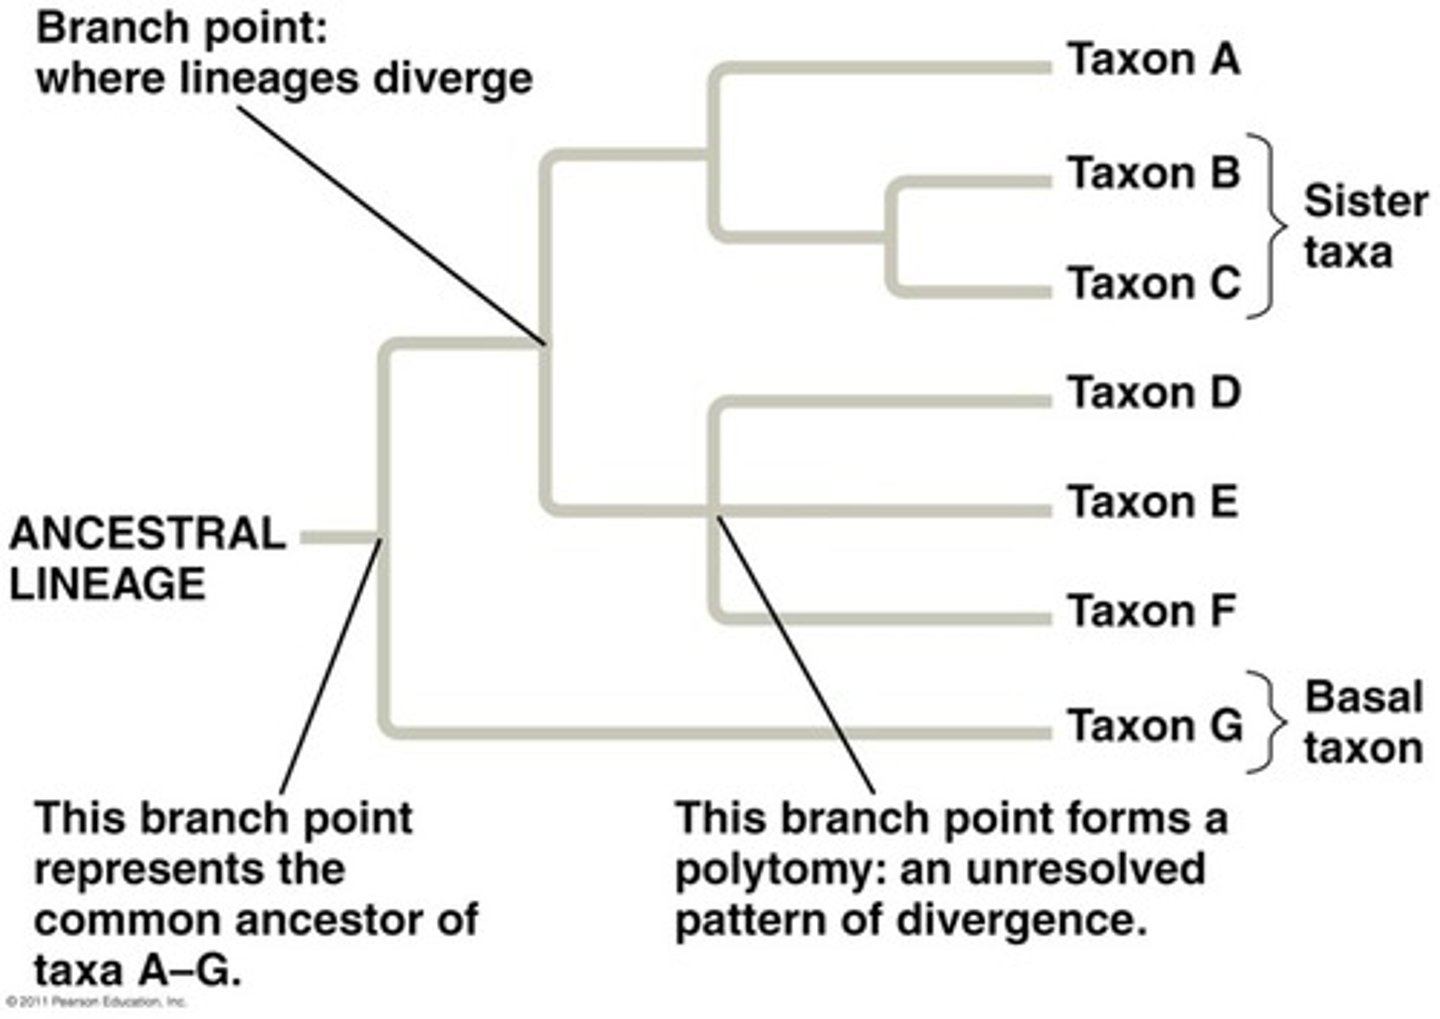 <p>A phylogenetic tree or evolutionary tree is a branching diagram or "tree" showing the inferred evolutionary relationships among various biological species or other entities—their phylogeny—based upon similarities and differences in their physical or genetic characteristics.</p>